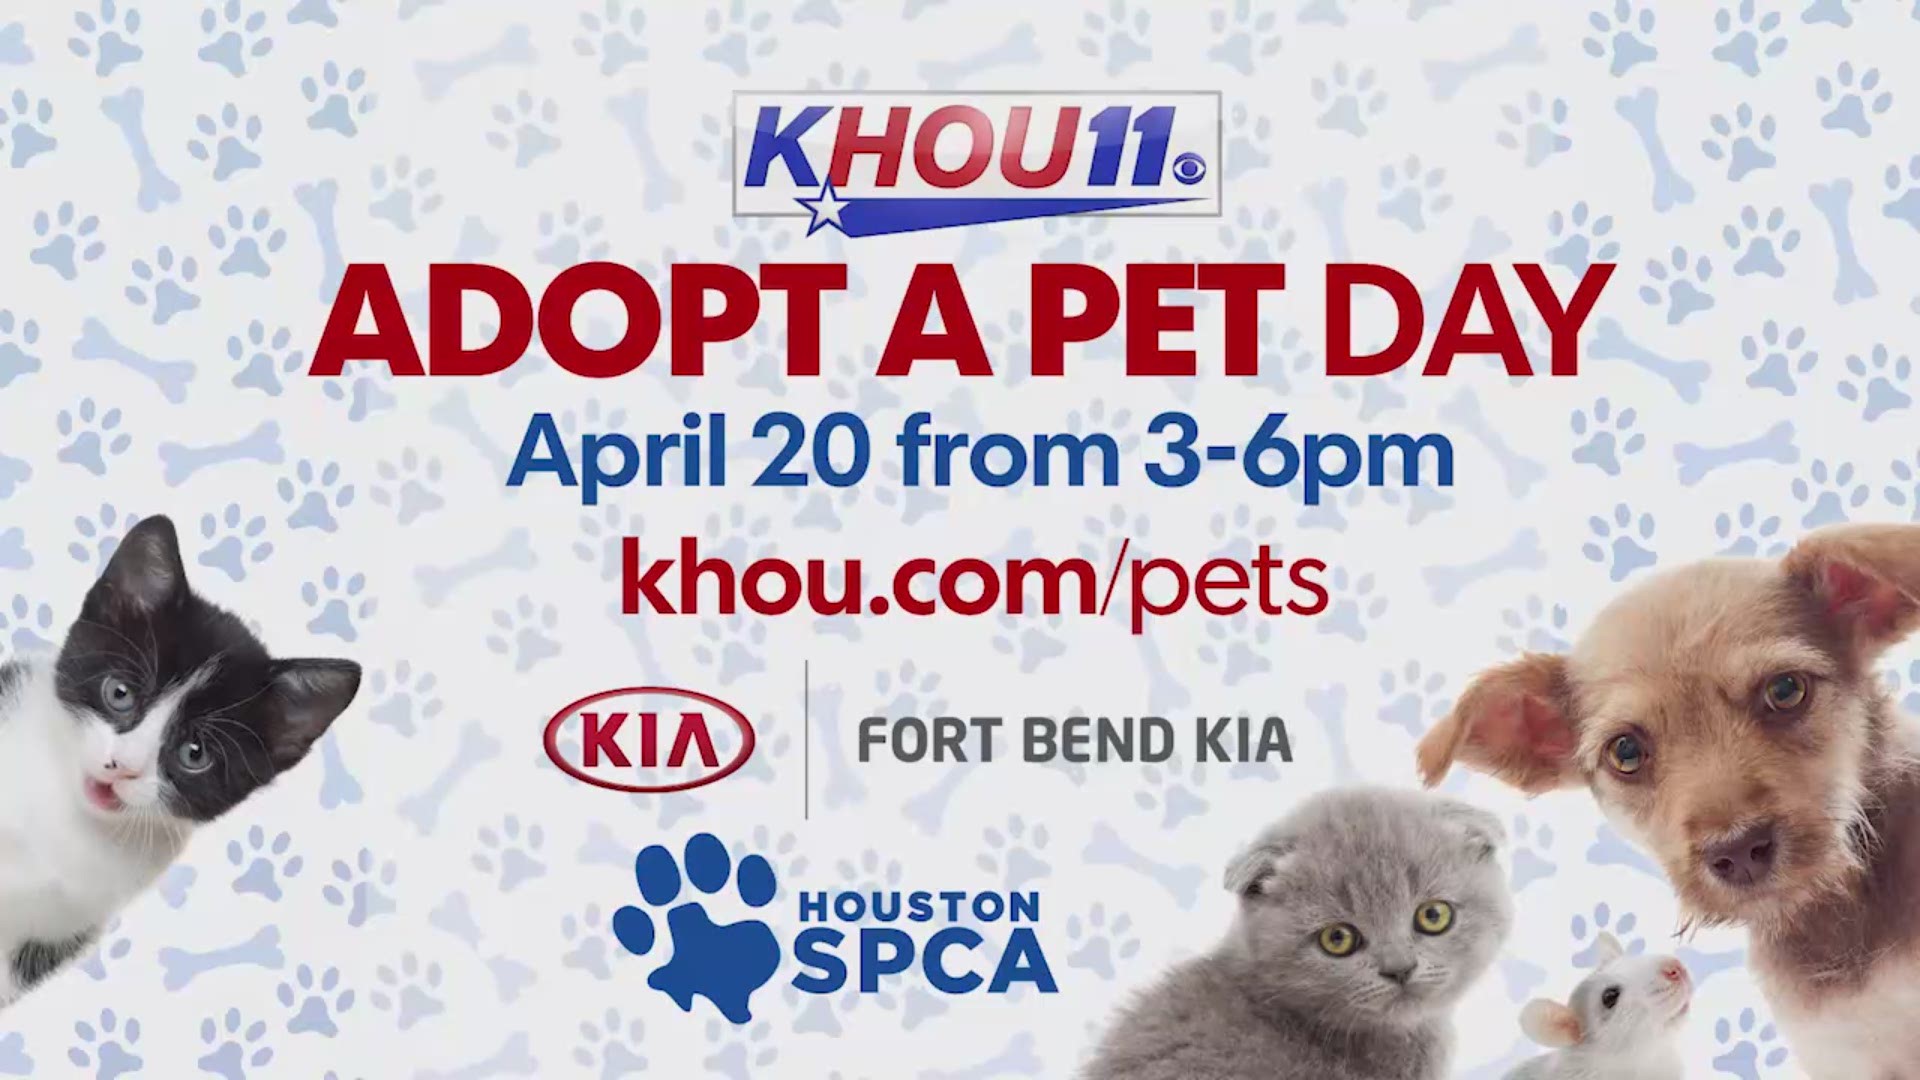 Join us for the KHOU 11 Adopt-a-Pet event on April 20, 2018 from 3-6 p.m. at the Houston SPCA. We are helping our furry friends find new and loving homes. 